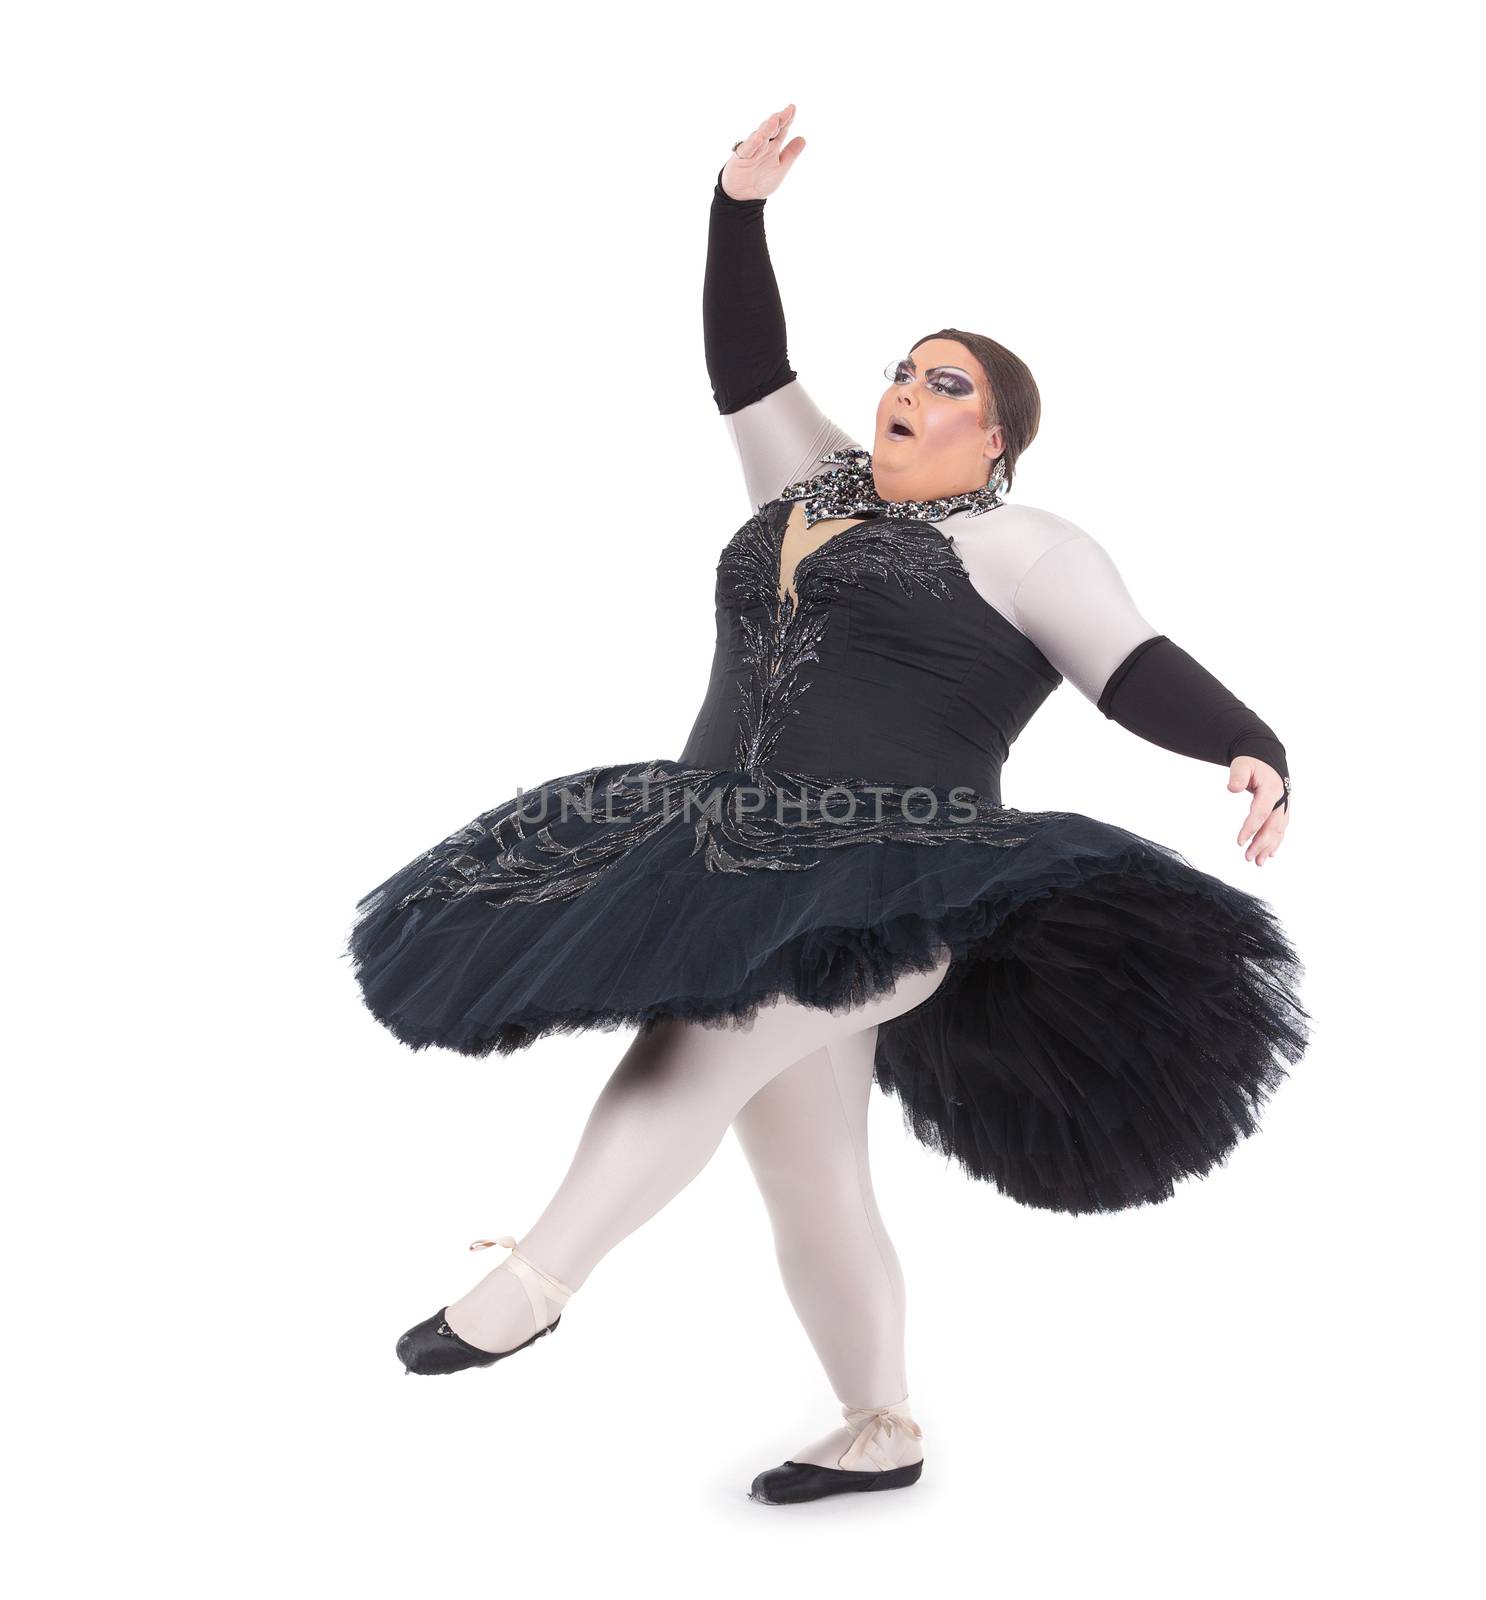 Drag queen dancing in a tutu by Discovod